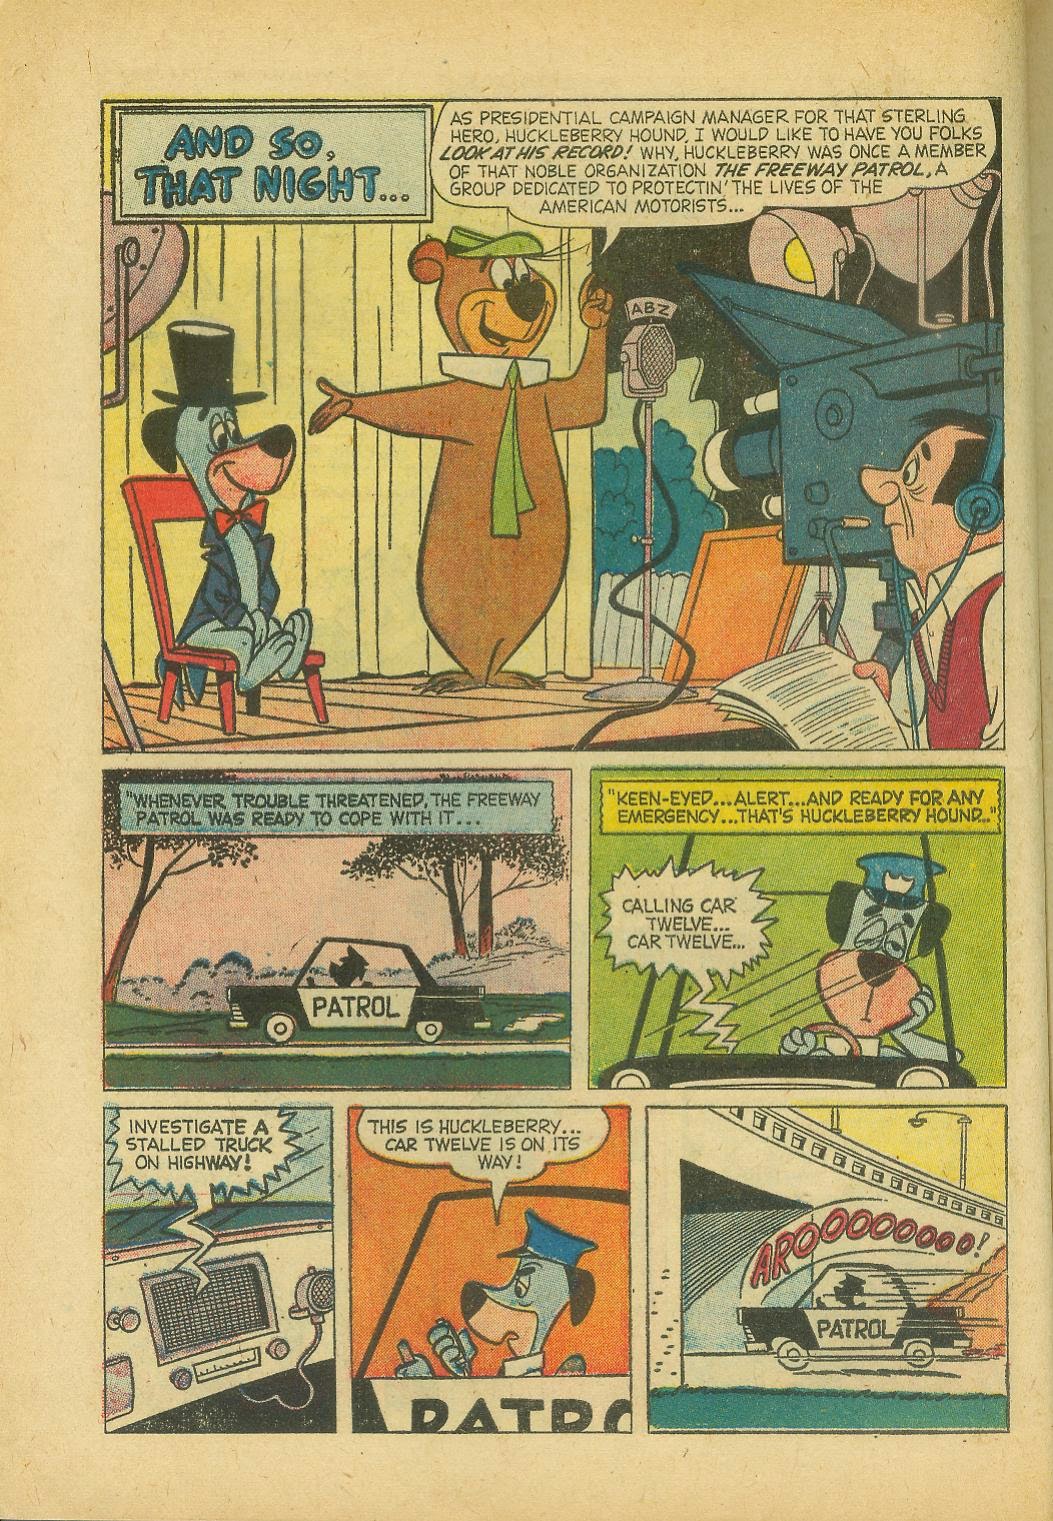 Saved From The Paper Drive: Huckleberry Hound for President